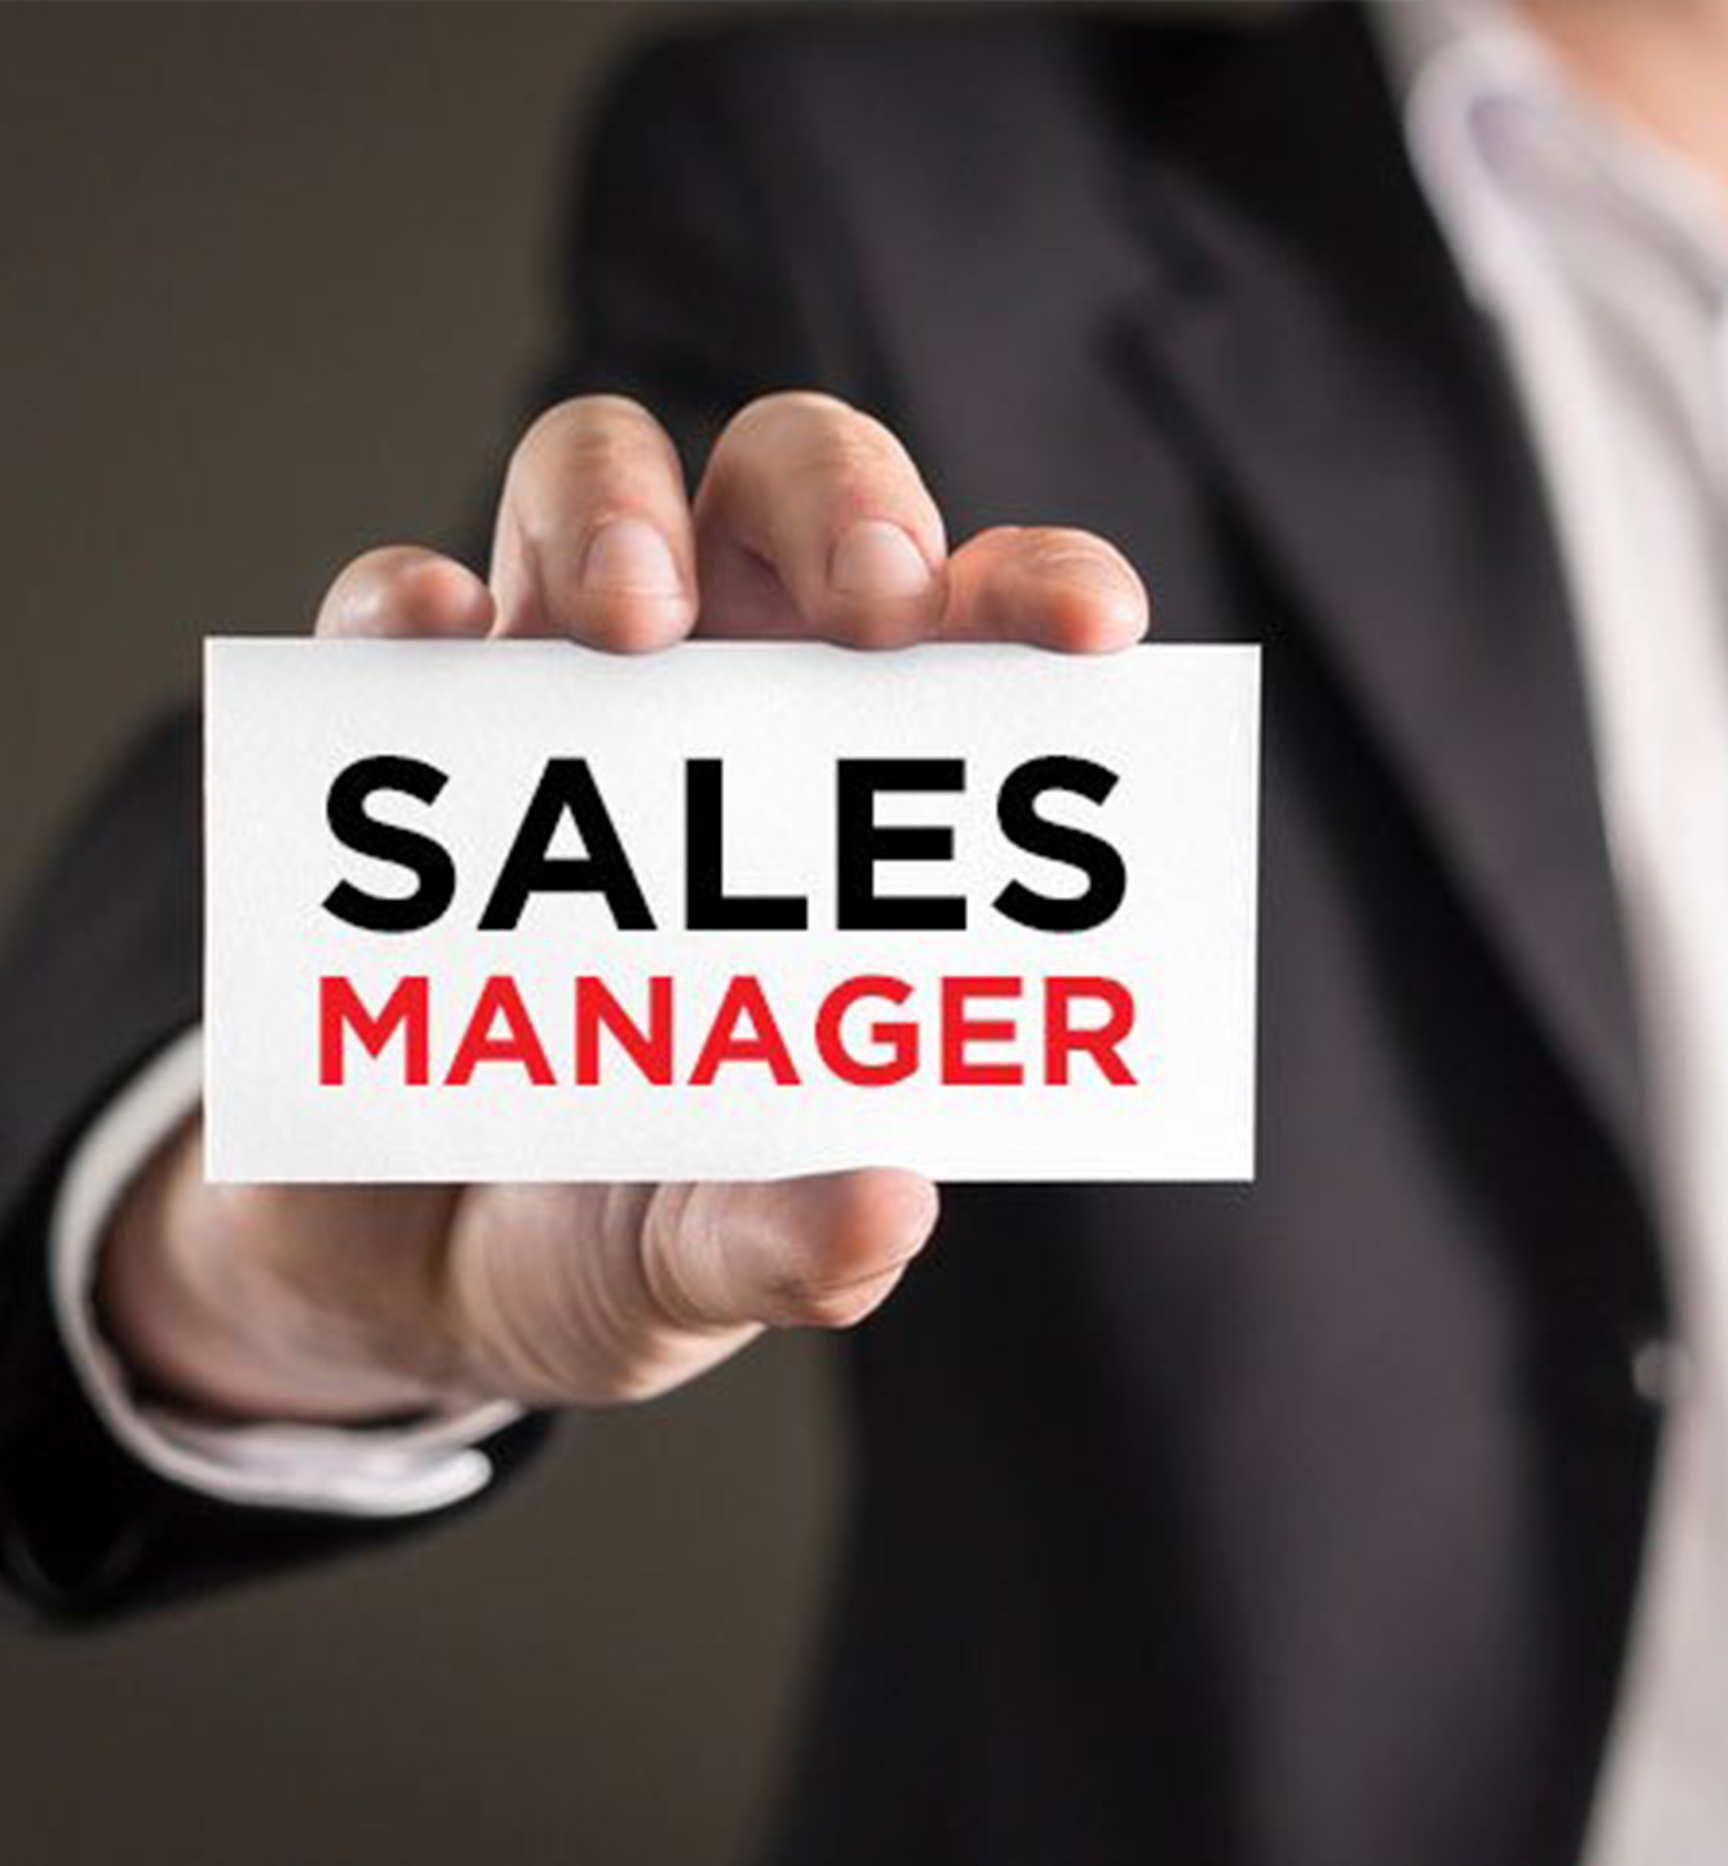 safegroup-new-business-sales-manager